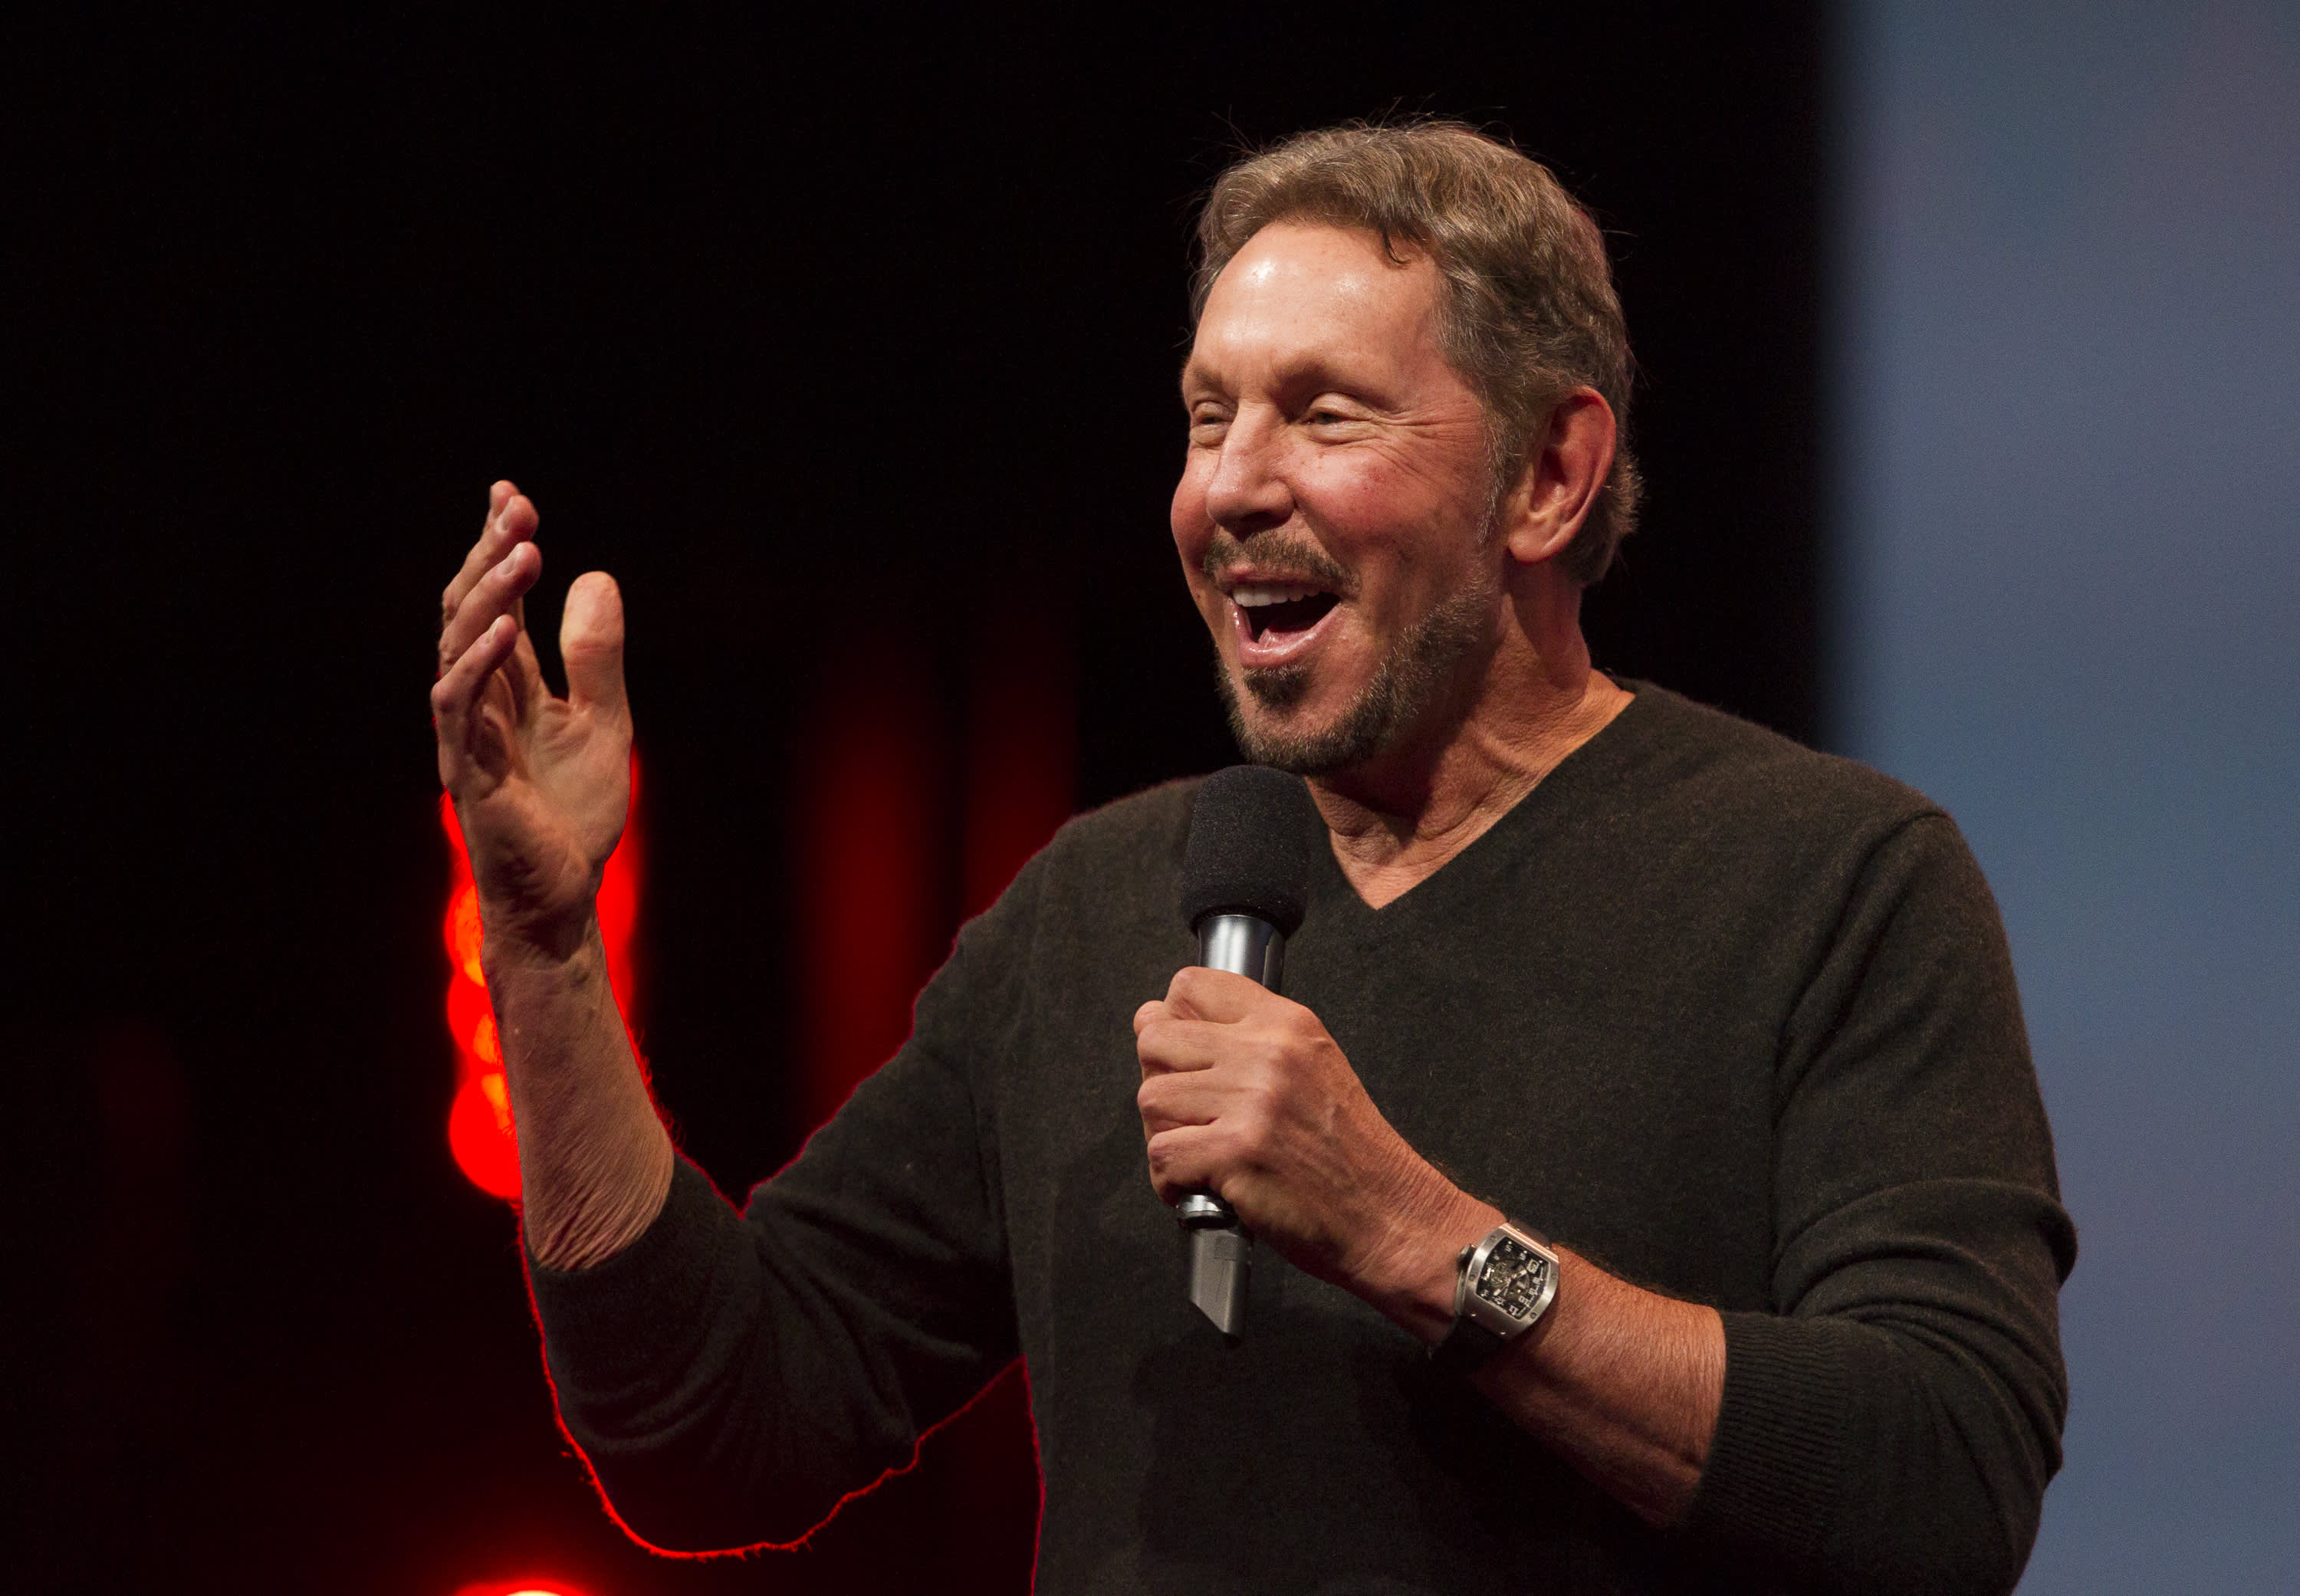 After AWS outage, Larry Ellison says Oracle’s cloud never ‘goes down’